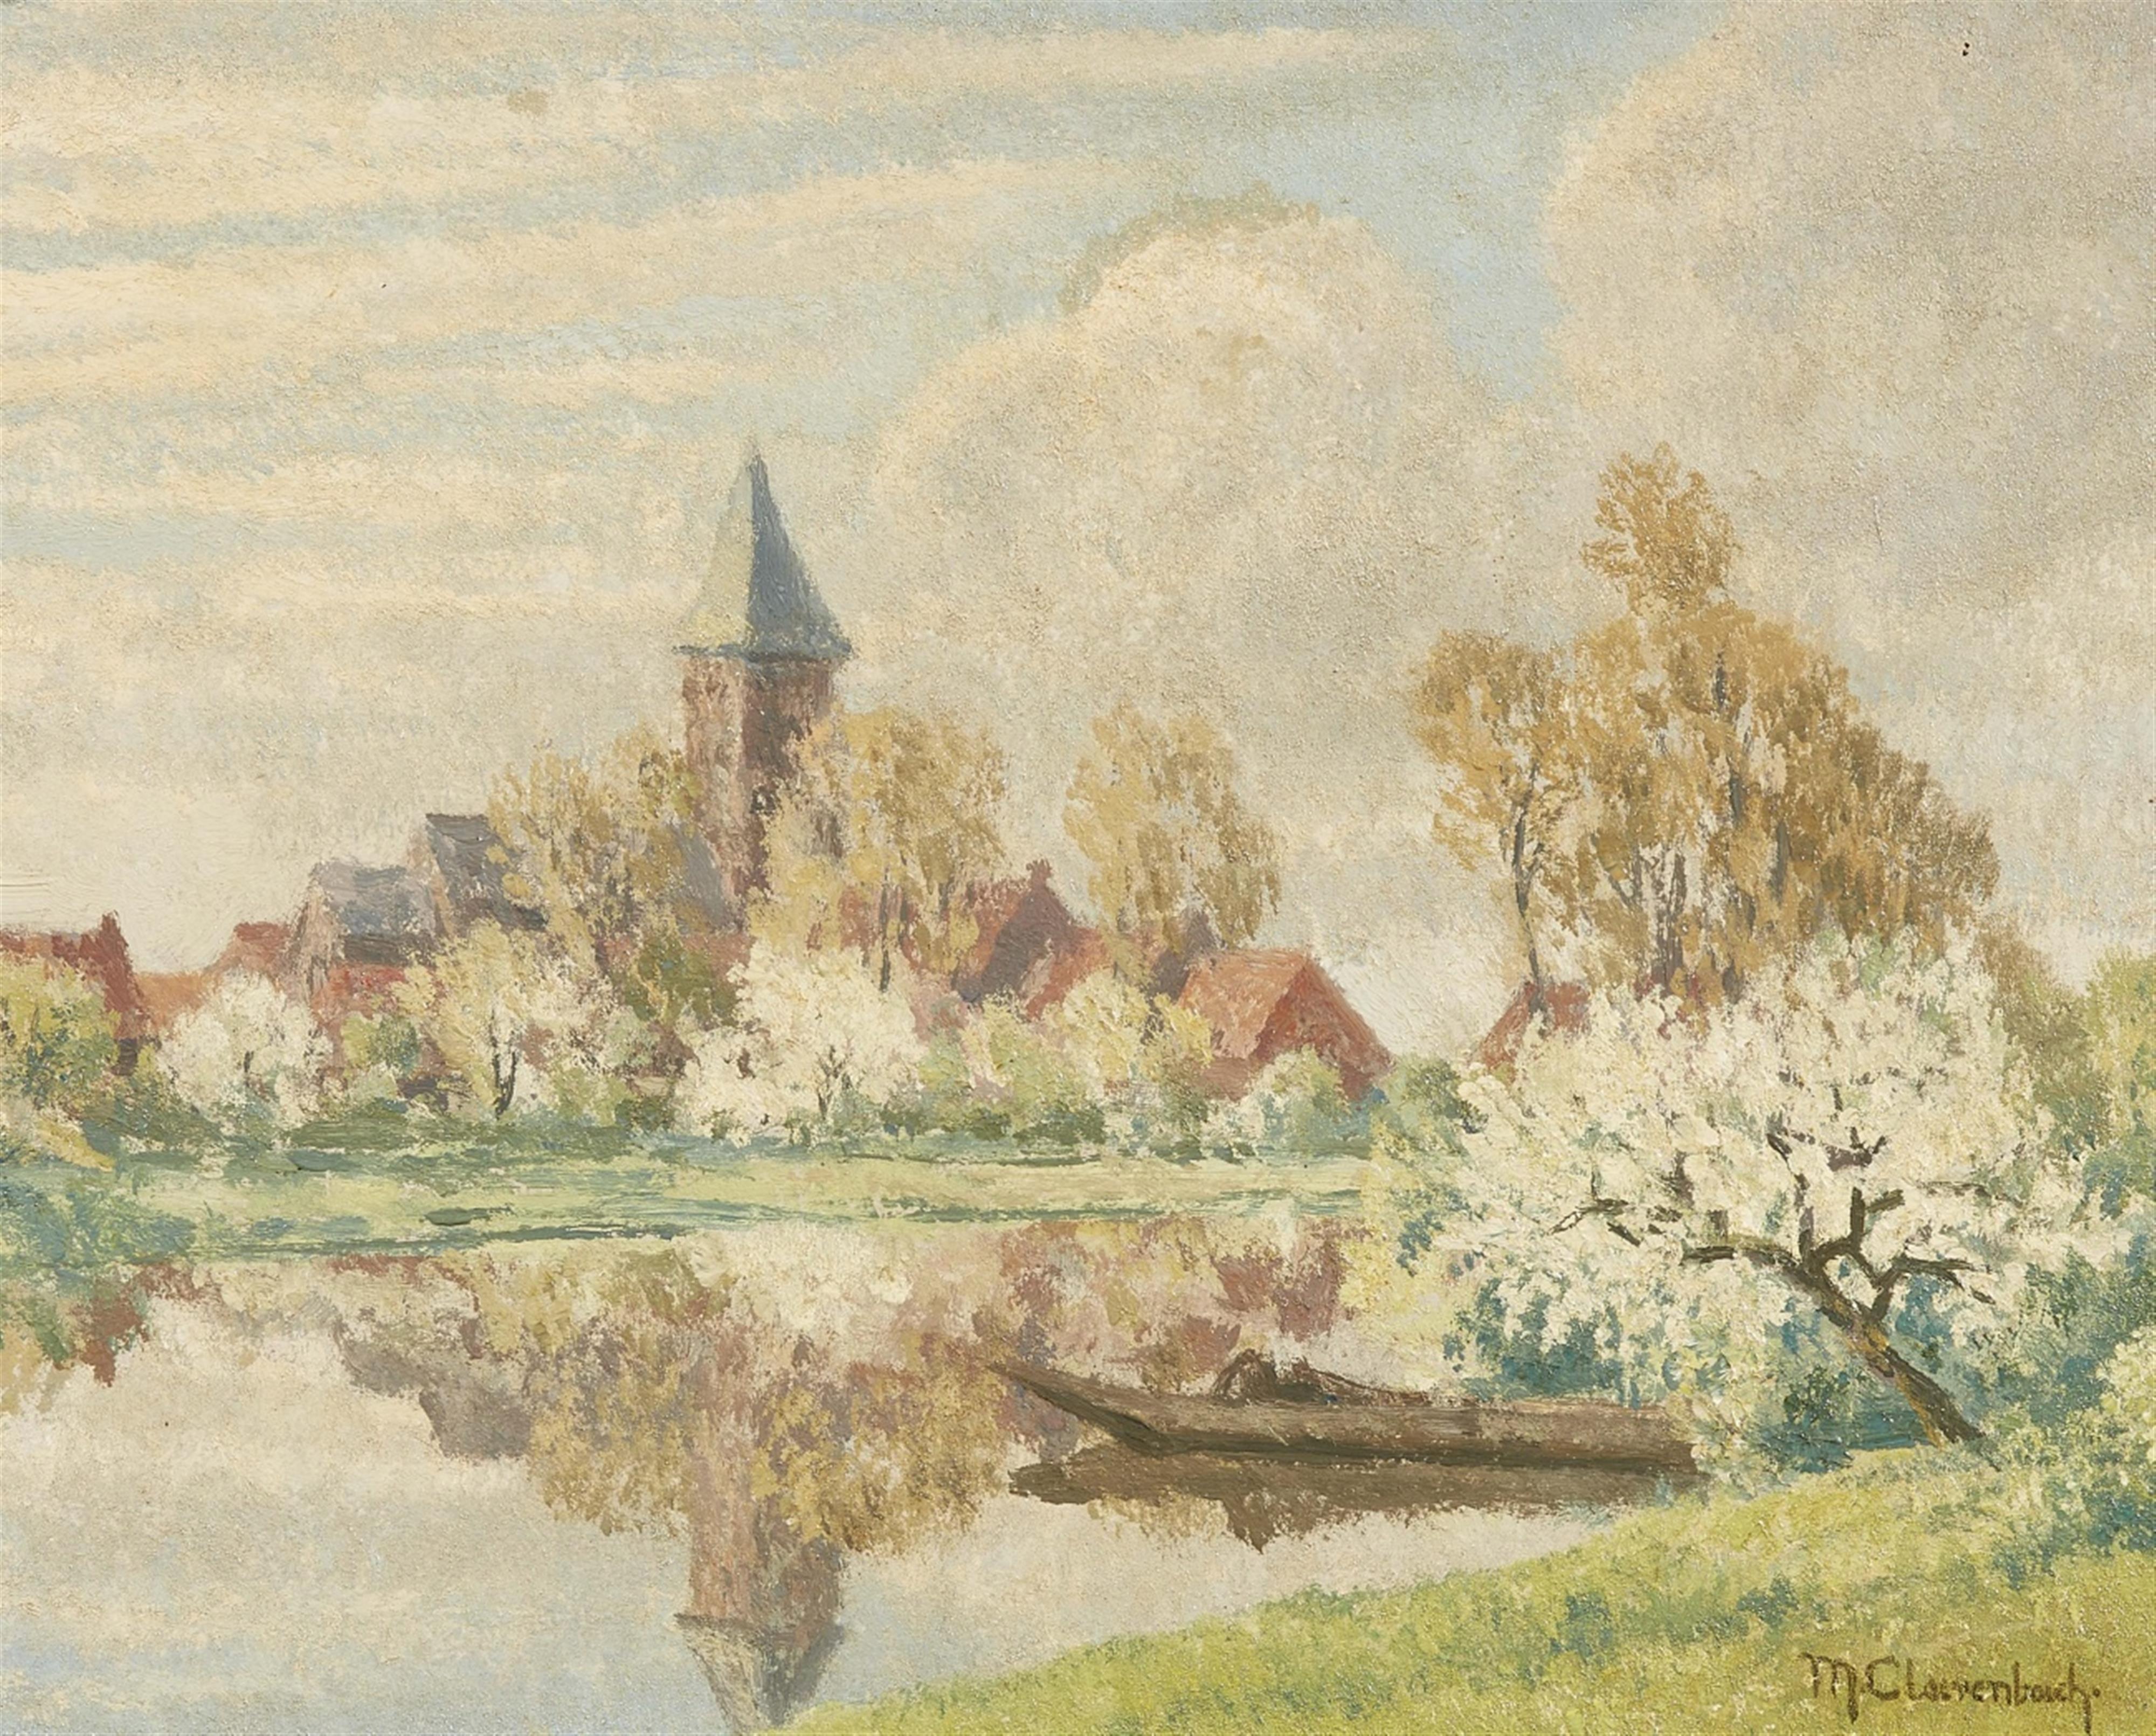 Max Clarenbach - Frühling in Wittlaer - image-1